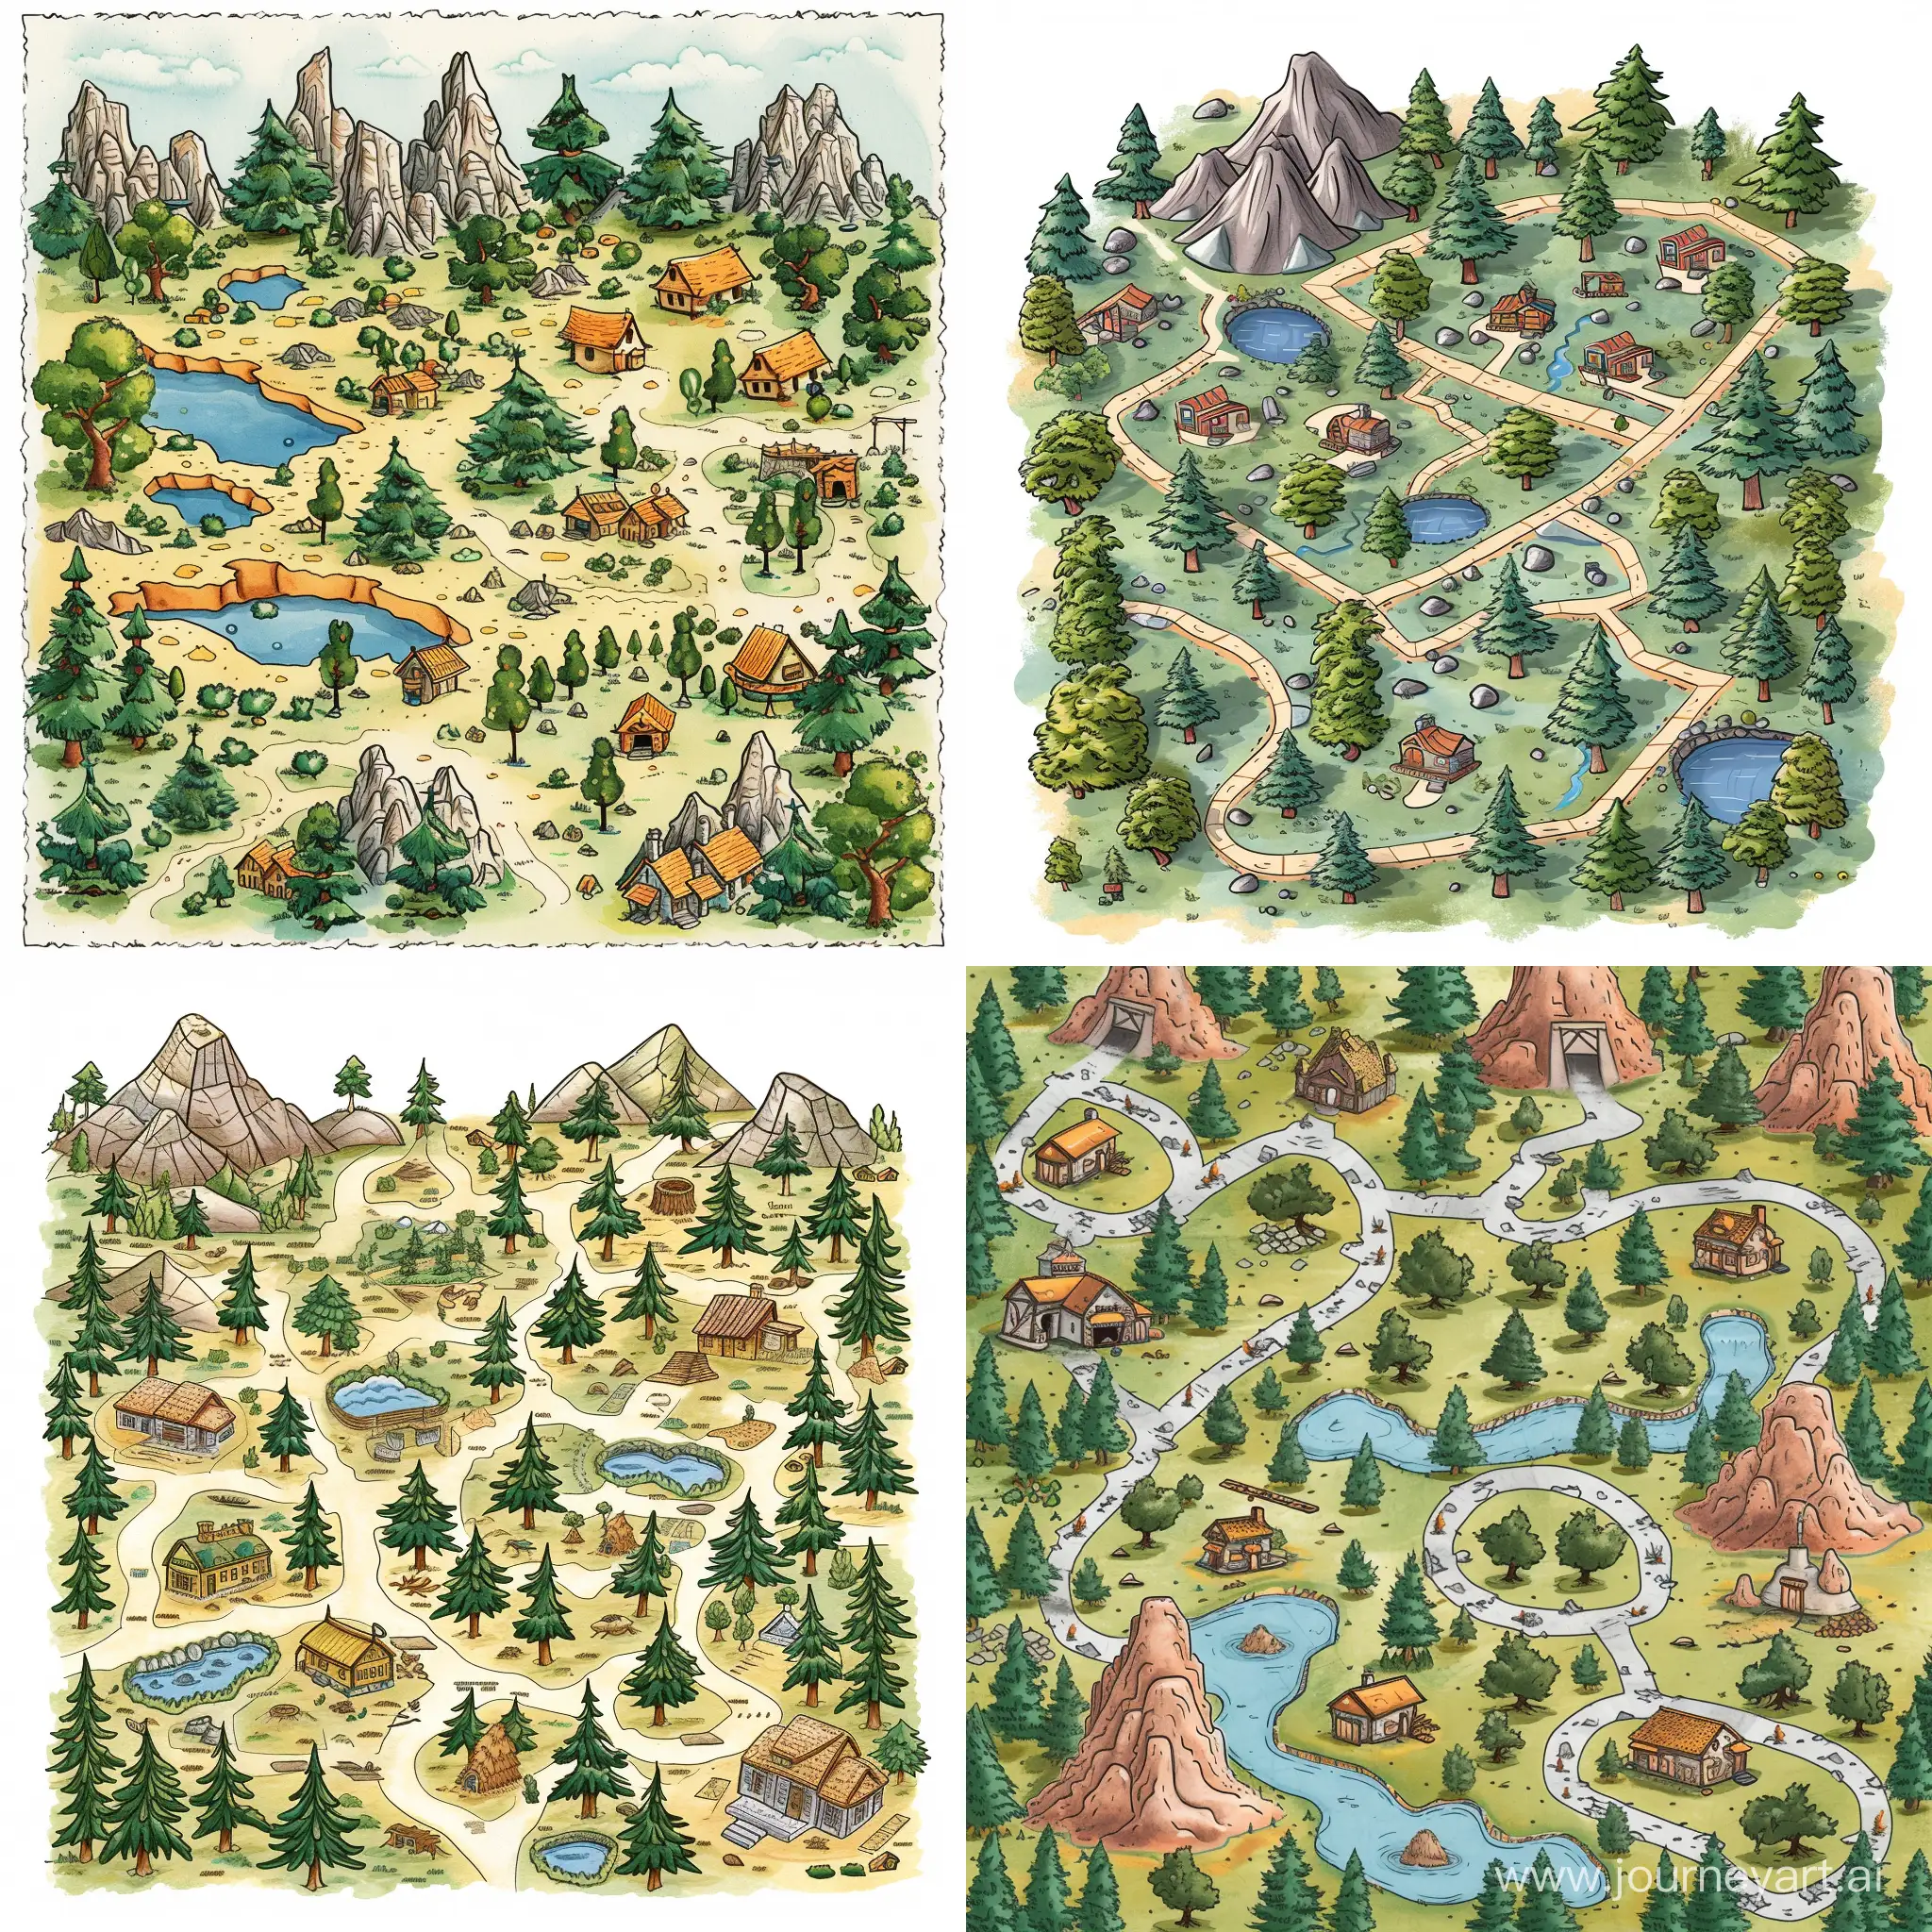 HandPainted-Board-Game-Landscape-with-Trees-Mountains-and-Houses